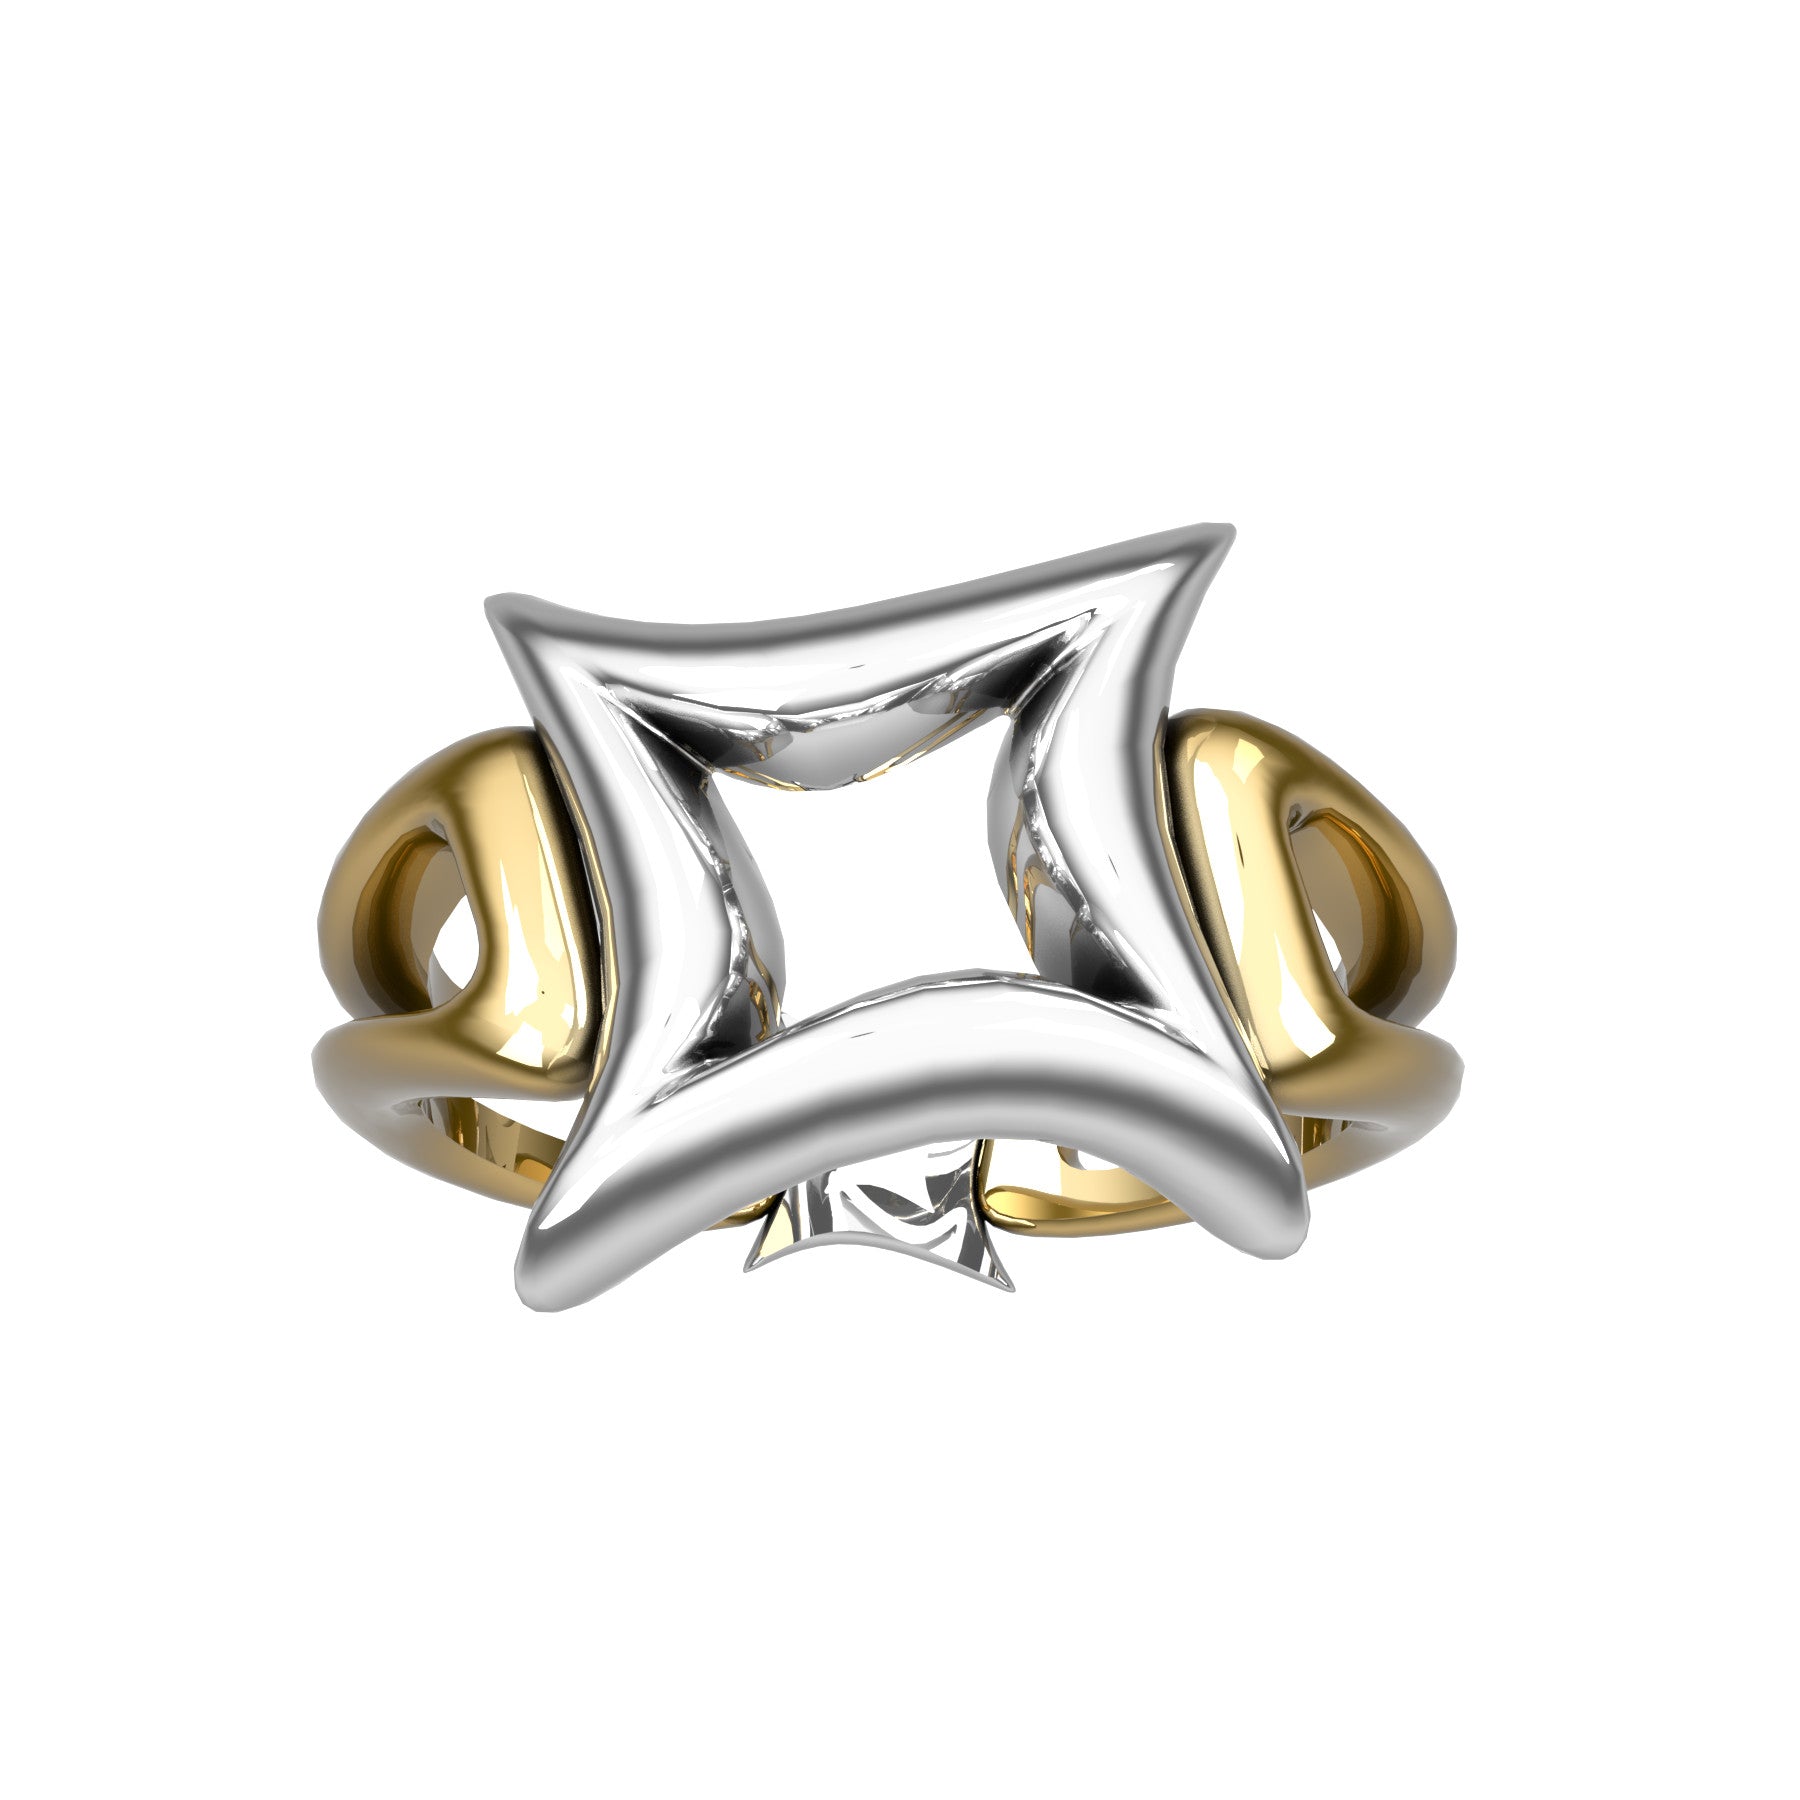 etoile bizarre ring, 18 K white and yellow gold, weight about 5,6 g. (0.20 oz), width 13,5 mm max